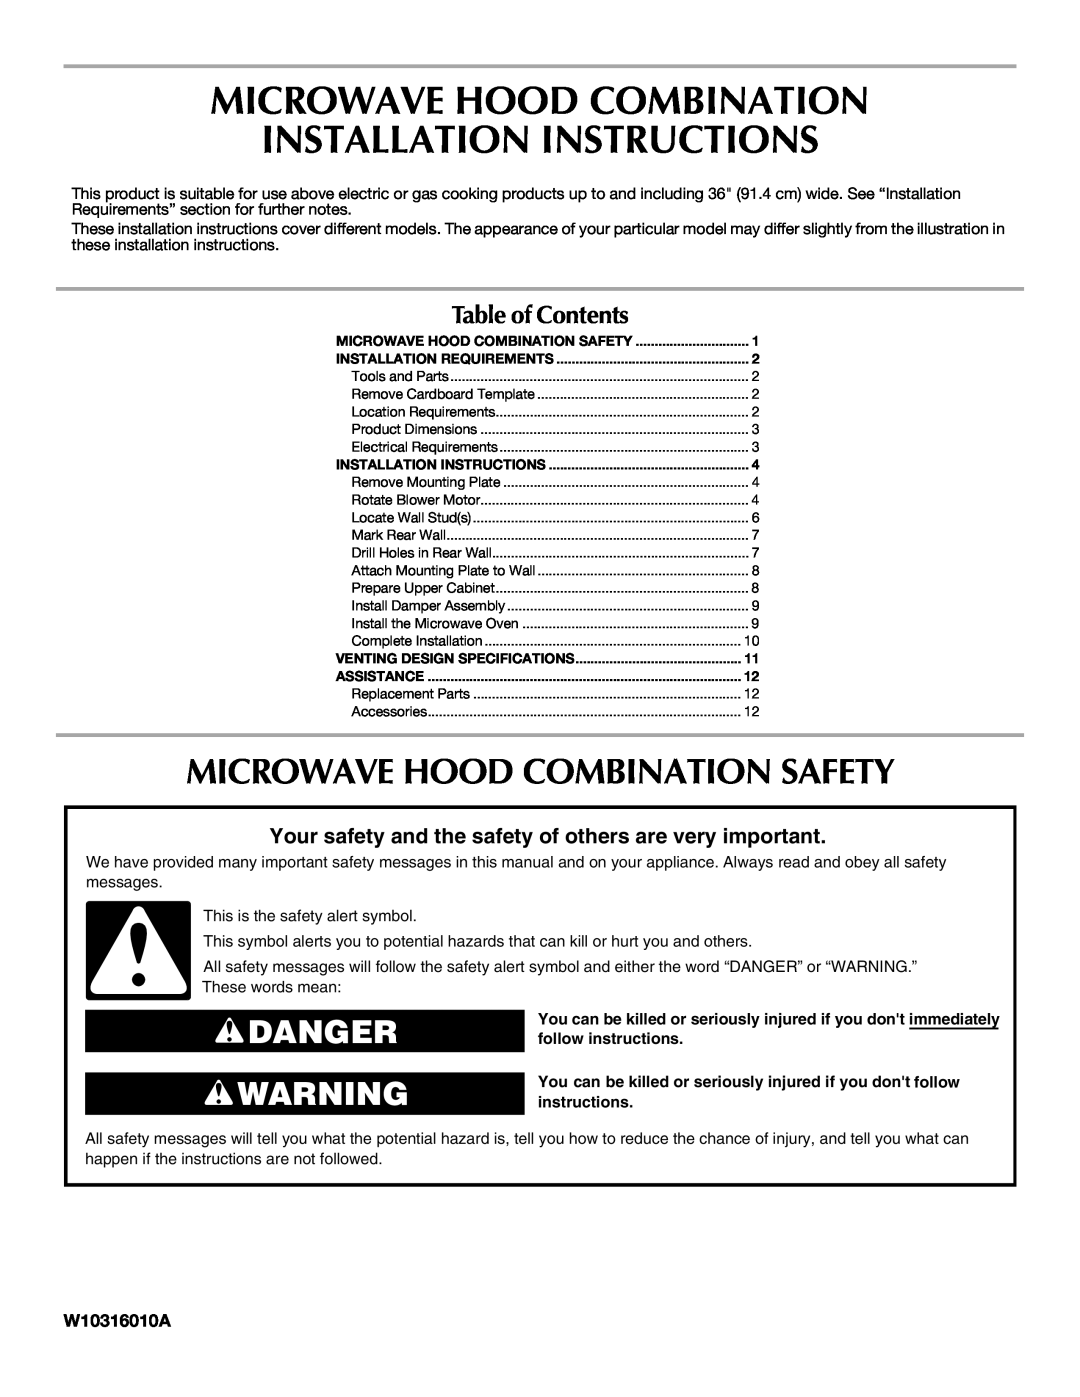 Maytag MMV5208WS installation instructions Microwave Hood Combination Safety, W10316010A, Danger, Table of Contents 